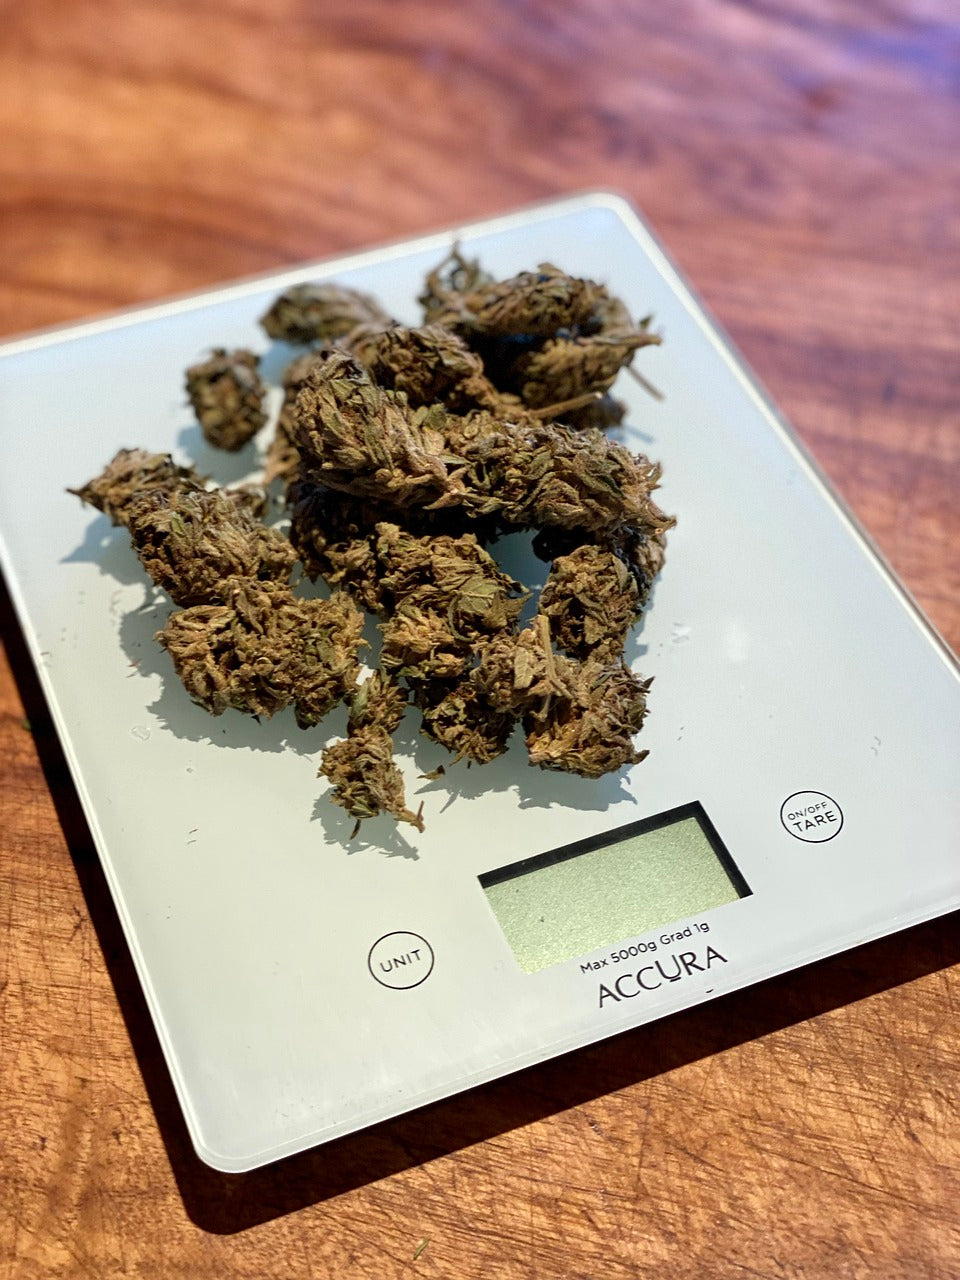 A Quick Guide to the Different Marijuana Measurements: Let's have a look